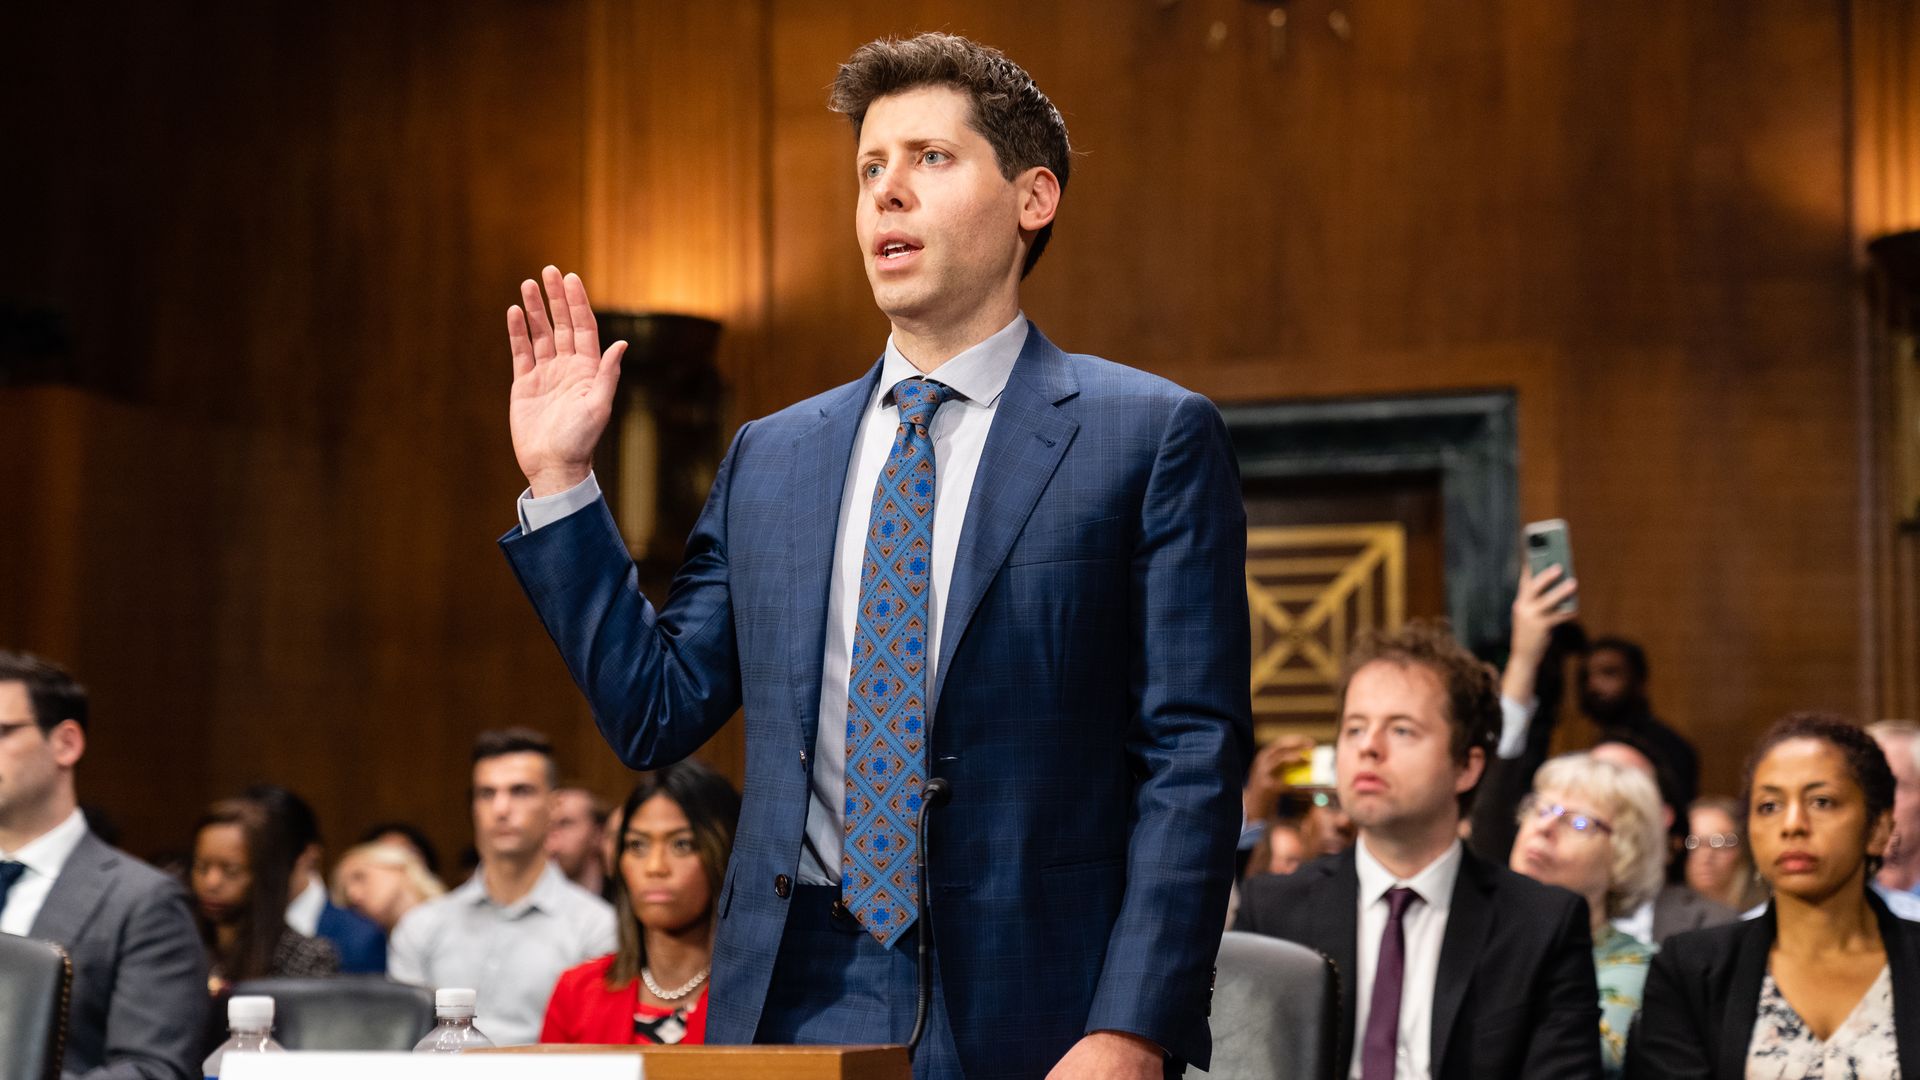 OpenAI CEO raises his hand to swear to tell the truth in a Senate room wearing a blue suit